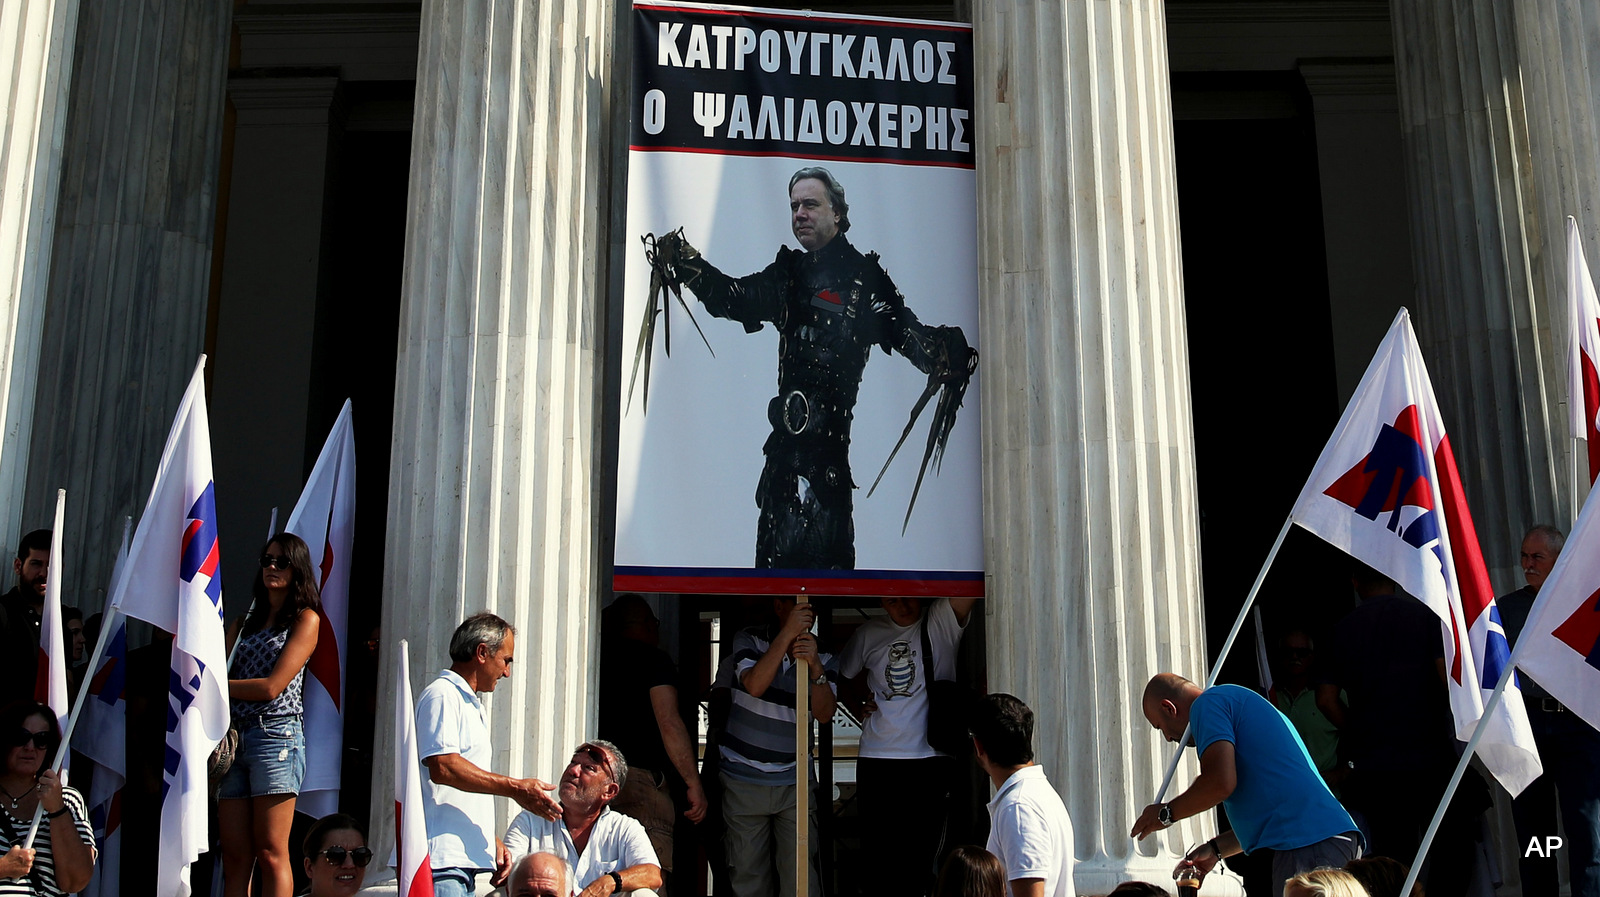 Protesters against new austerity measures hold a placard depicting Labour Minister George Katrougalos as the movie character Edward Scissorhands during a protest outside Zappeion Hall in Athens, Friday, Sept. 16, 2016. The placard reads in Greek"Katrougalos Scissorhands".